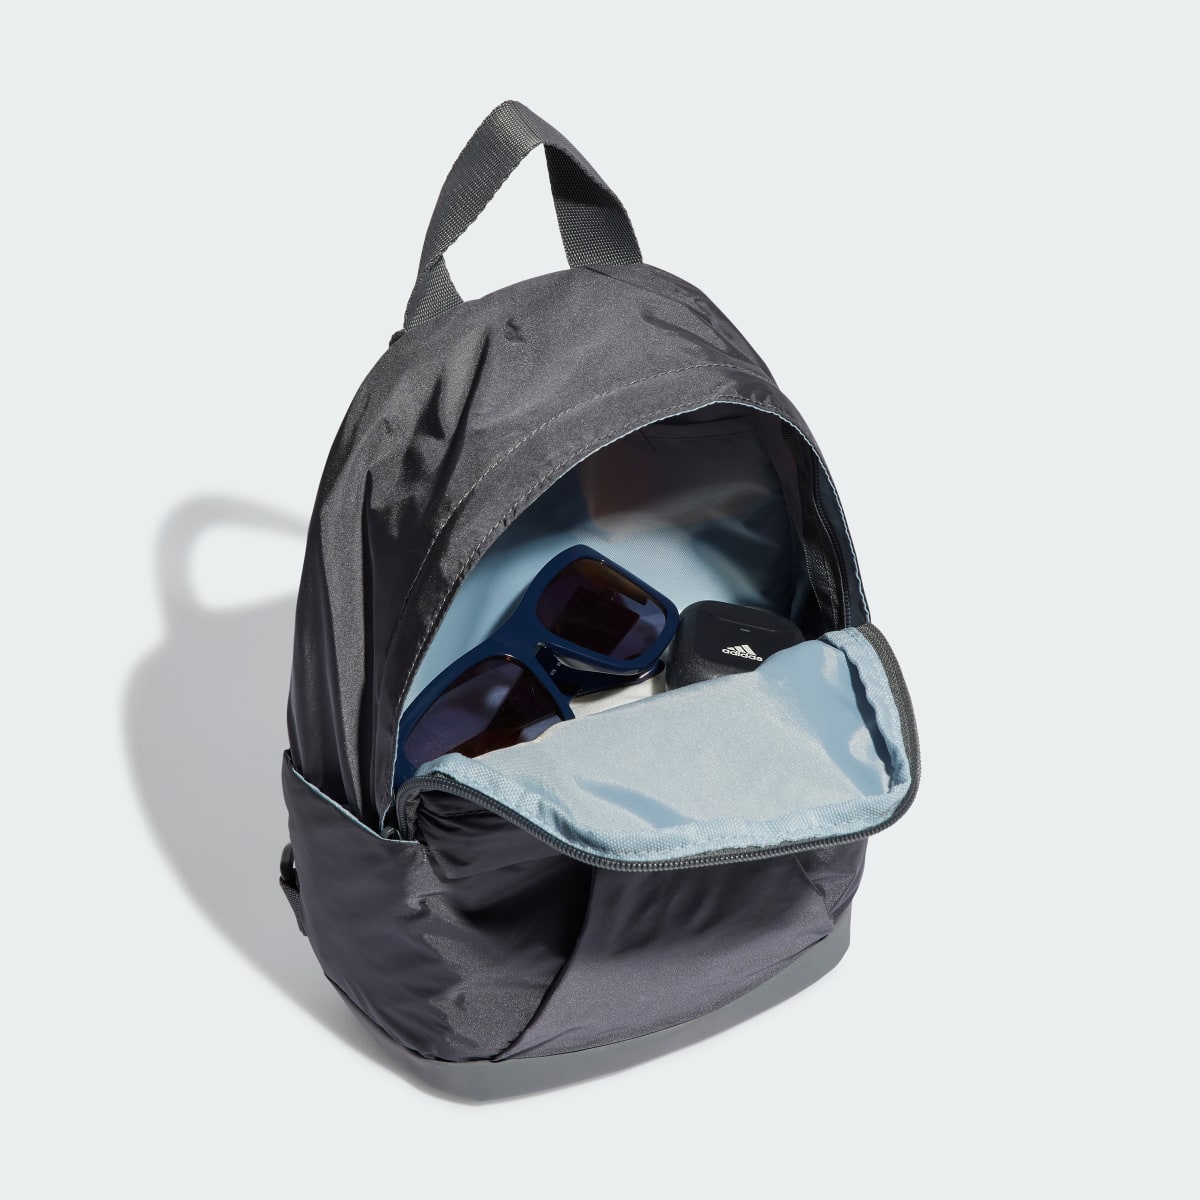 Adidas Classic Gen Z Backpack Extra Small. 5